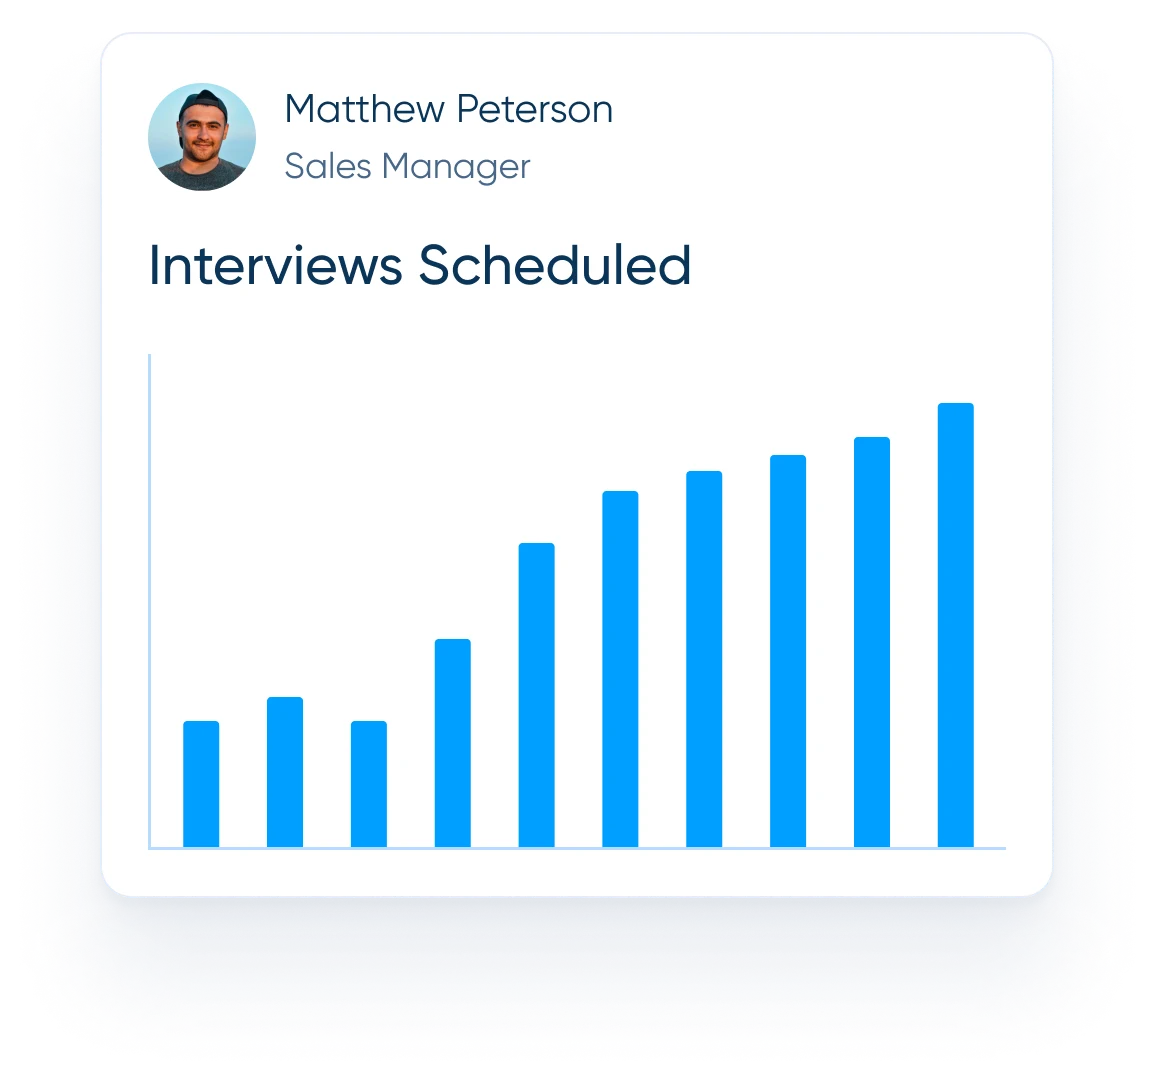 Access your interview and meeting insights